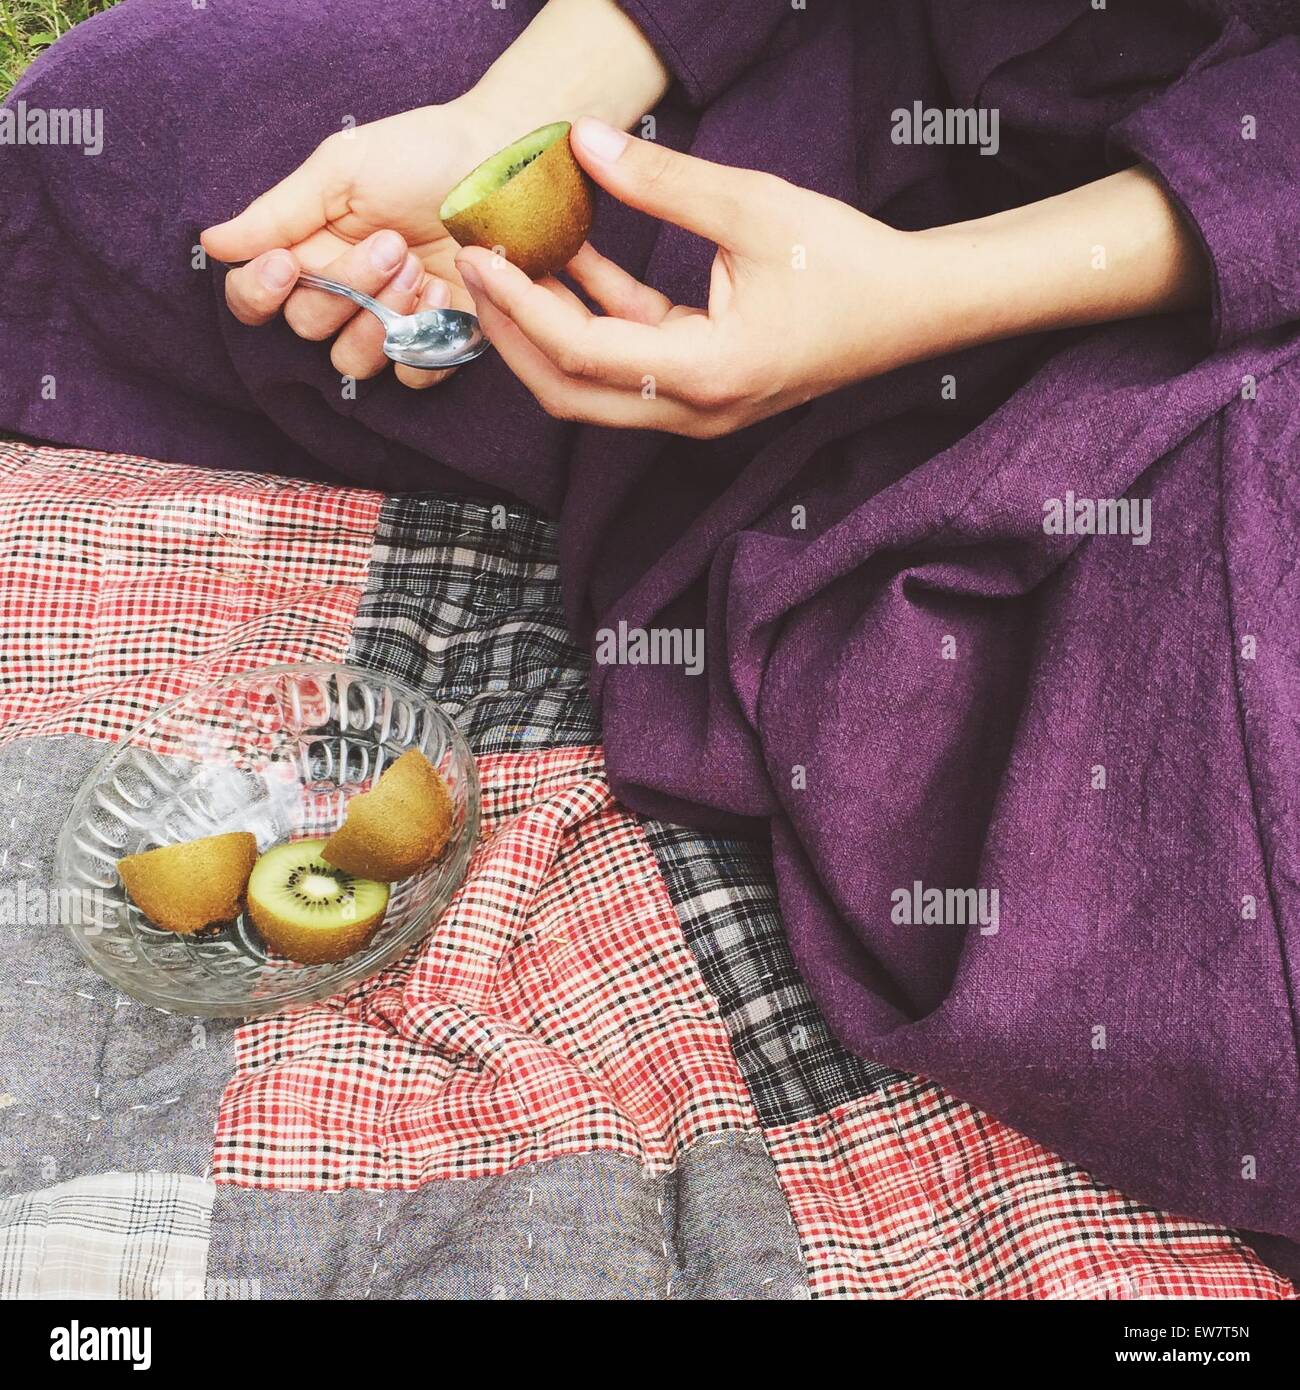 Close-up of a woman sitting on a rug eating a kiwi fruit Stock Photo